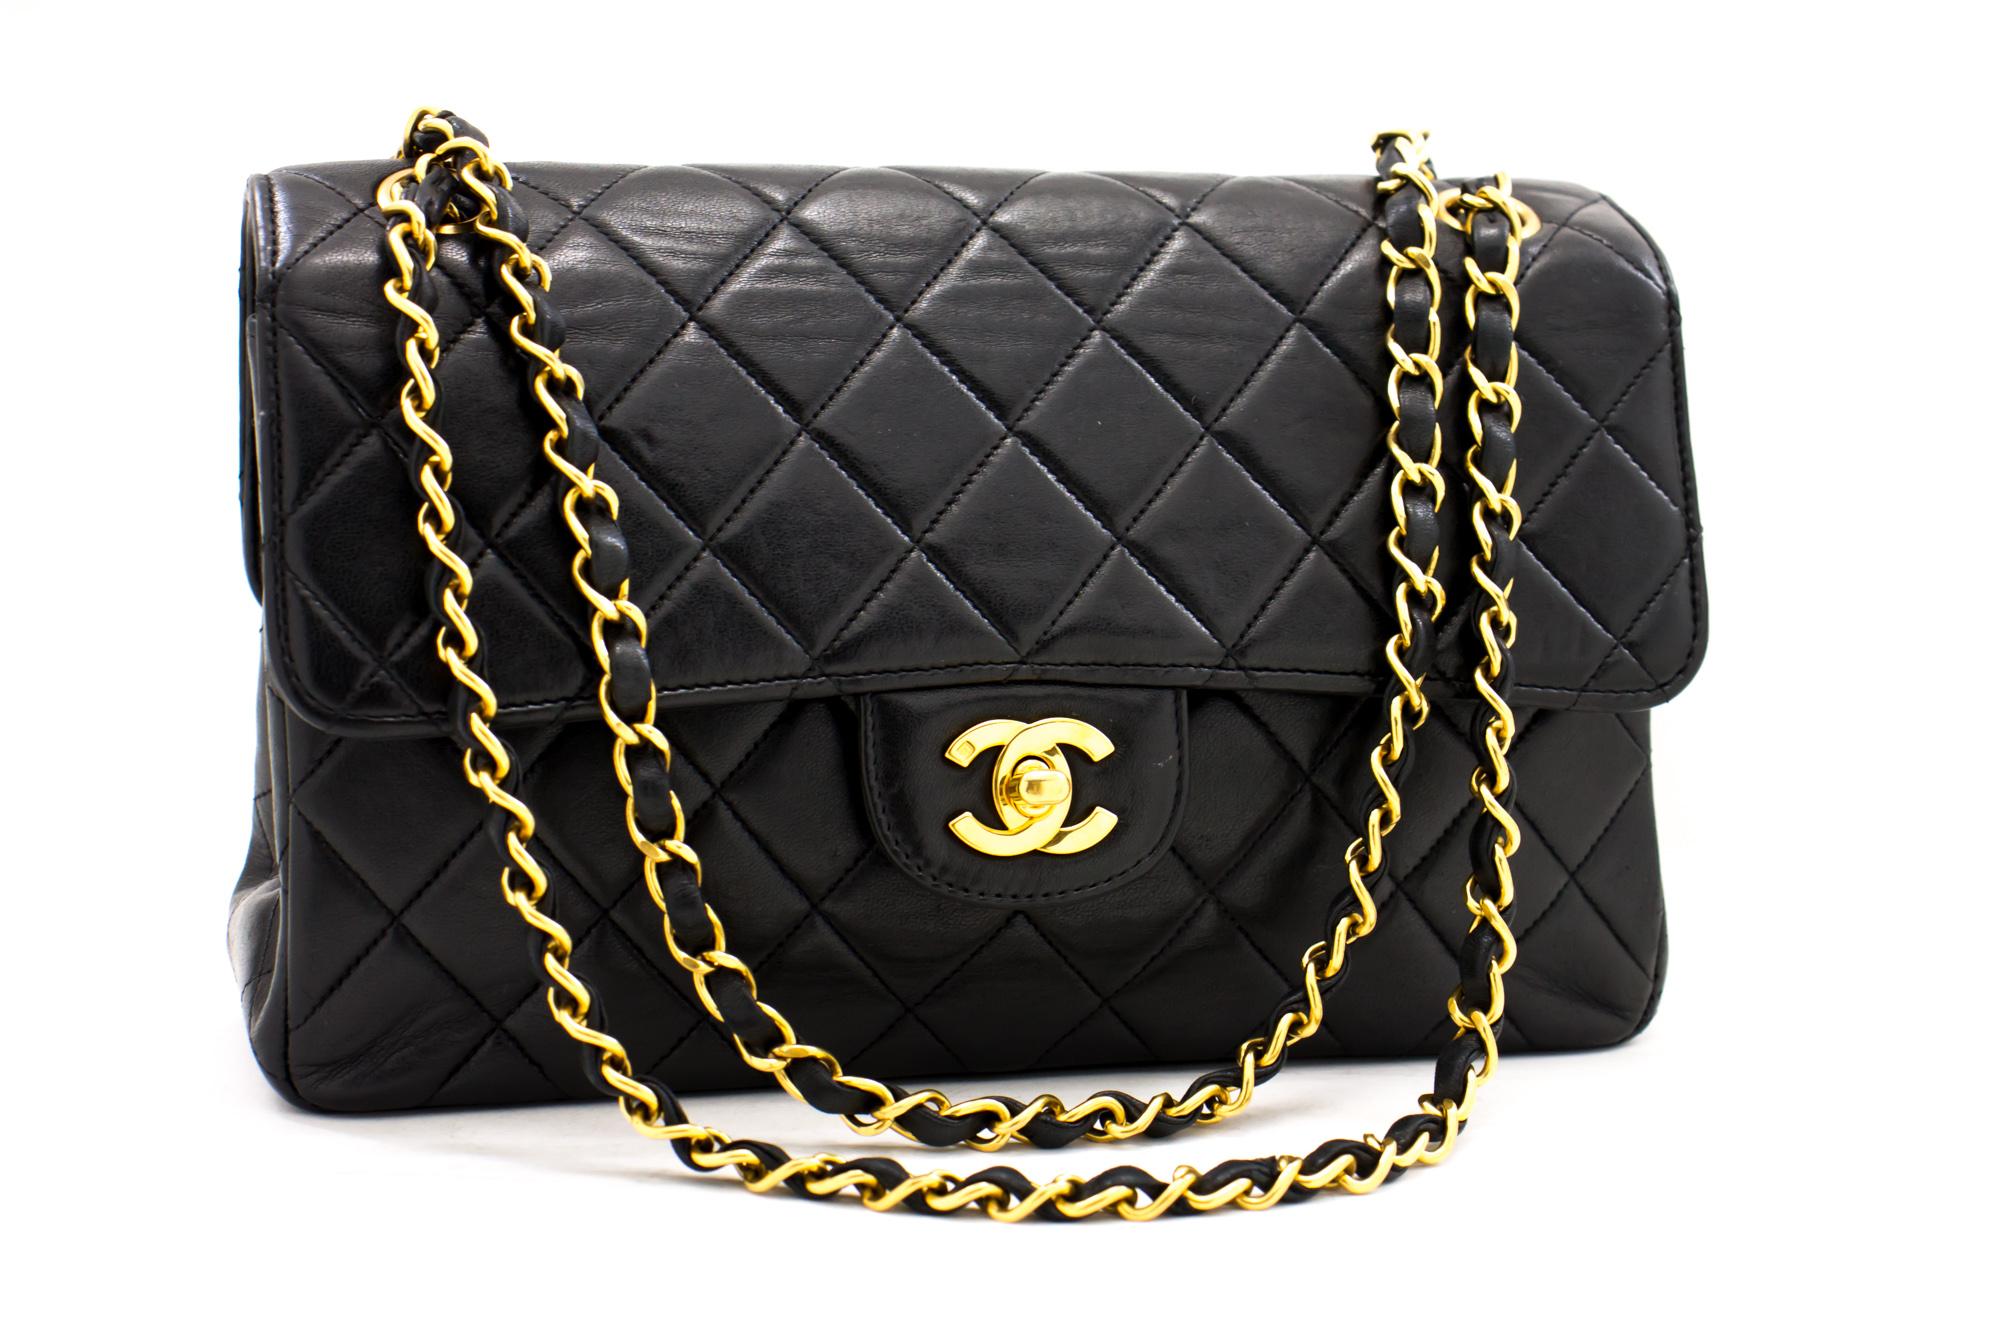 An authentic CHANEL Double Faces W Sided Chain Shoulder Bag Black Quilted Flap. The color is Black. The outside material is Leather. The pattern is Solid. This item is Vintage / Classic. The year of manufacture would be 1994-1996.
Conditions &